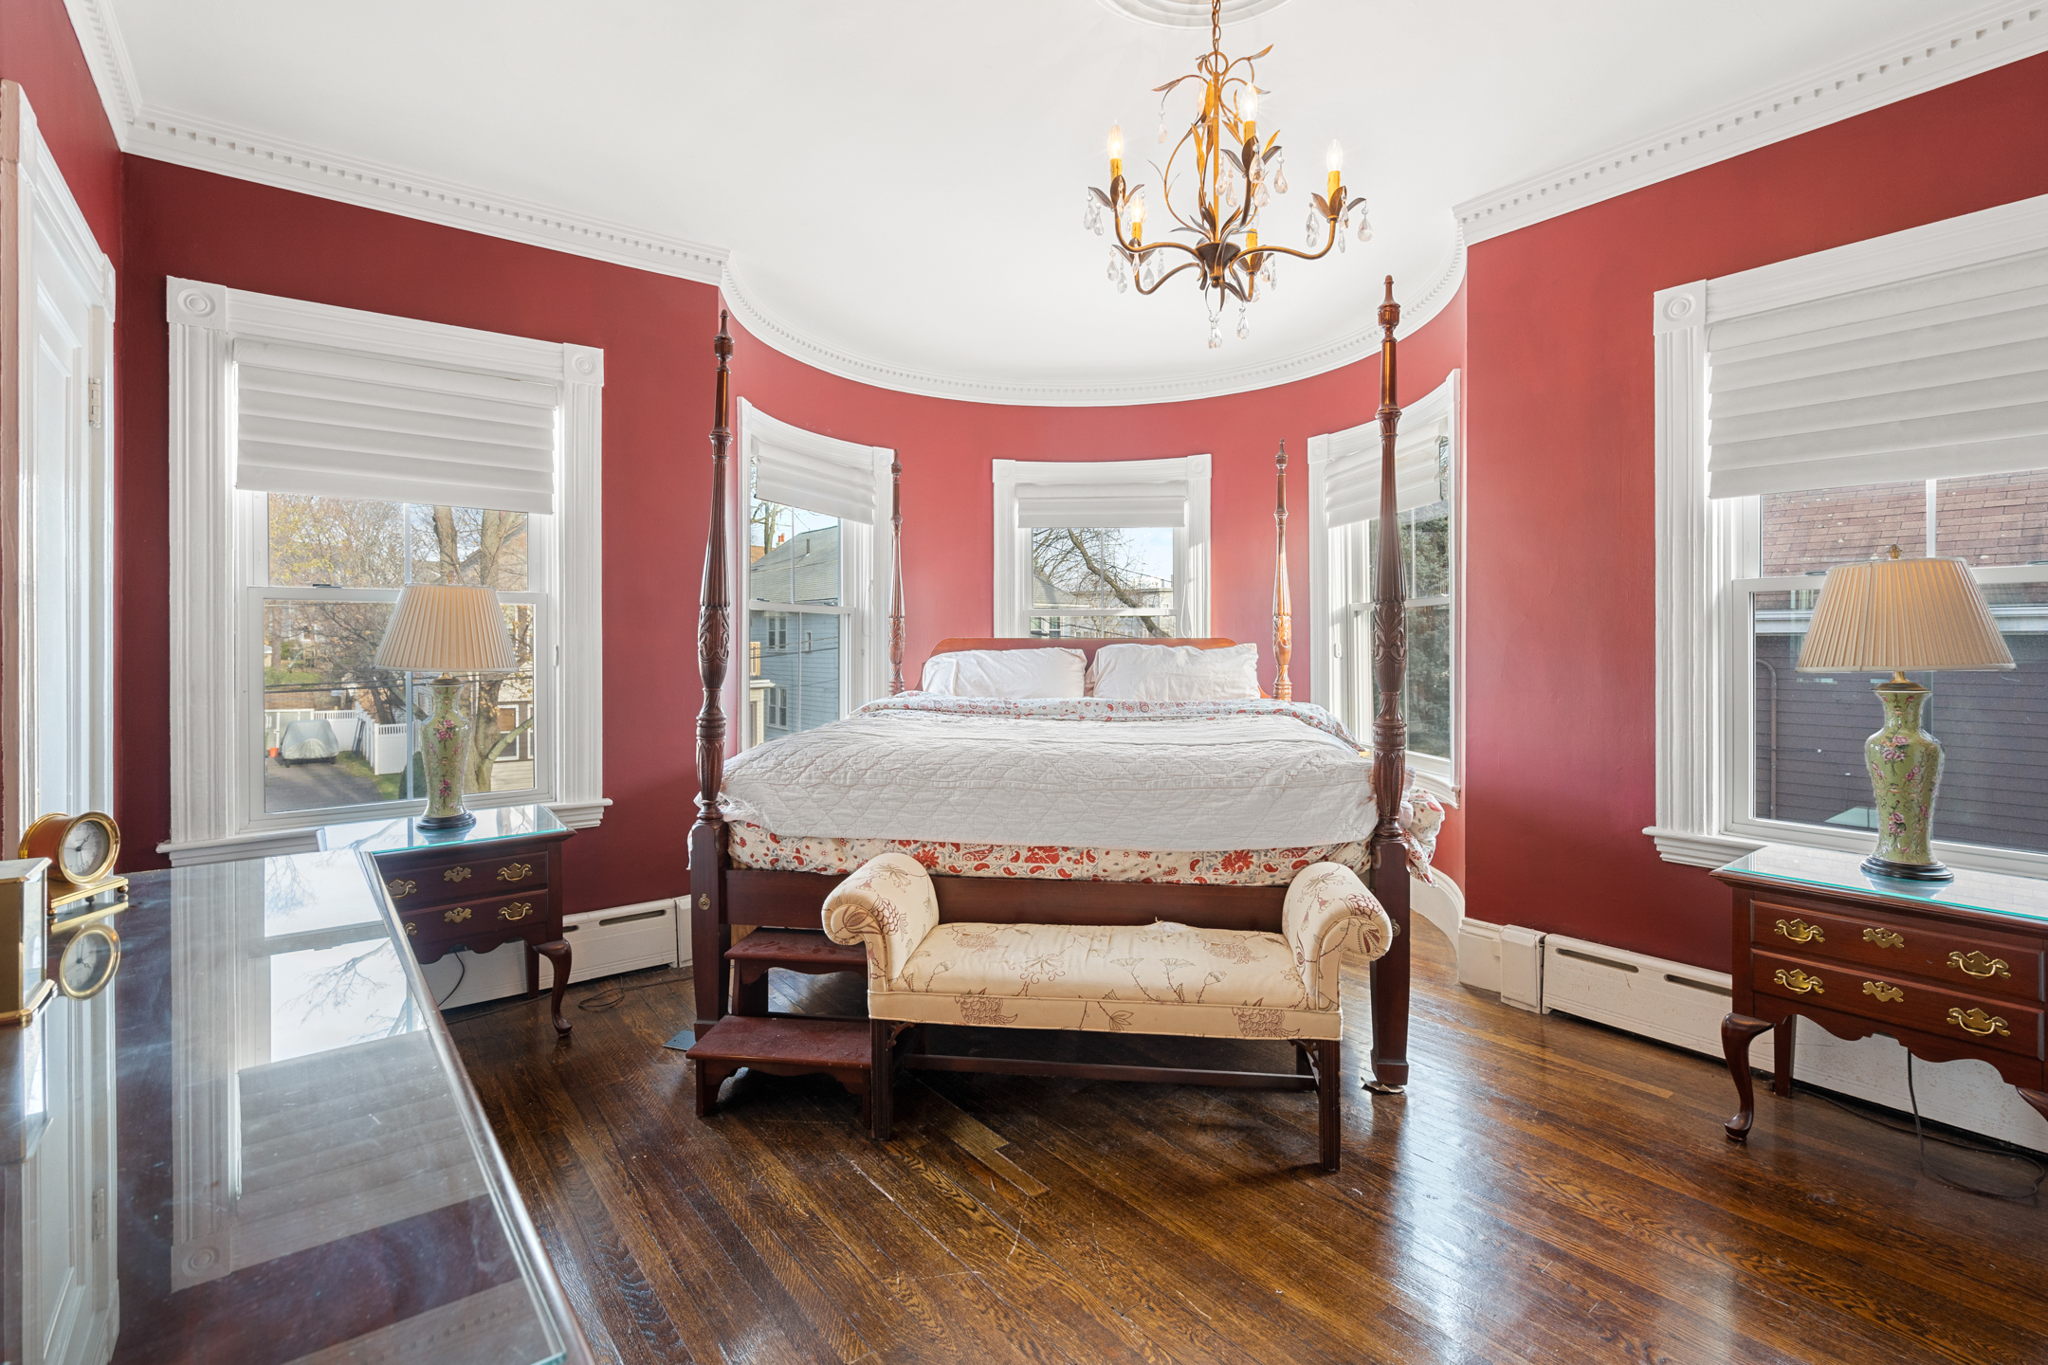 The owner suite has red walls, a brass and crystal chandelier, hardwood flooring, crown molding. the trim is white. There is a two poster bed with a white duvet, a settee in front of the bed, a small bureau with a shaded lamp, an end table with a shaded lamp, and a bureau.